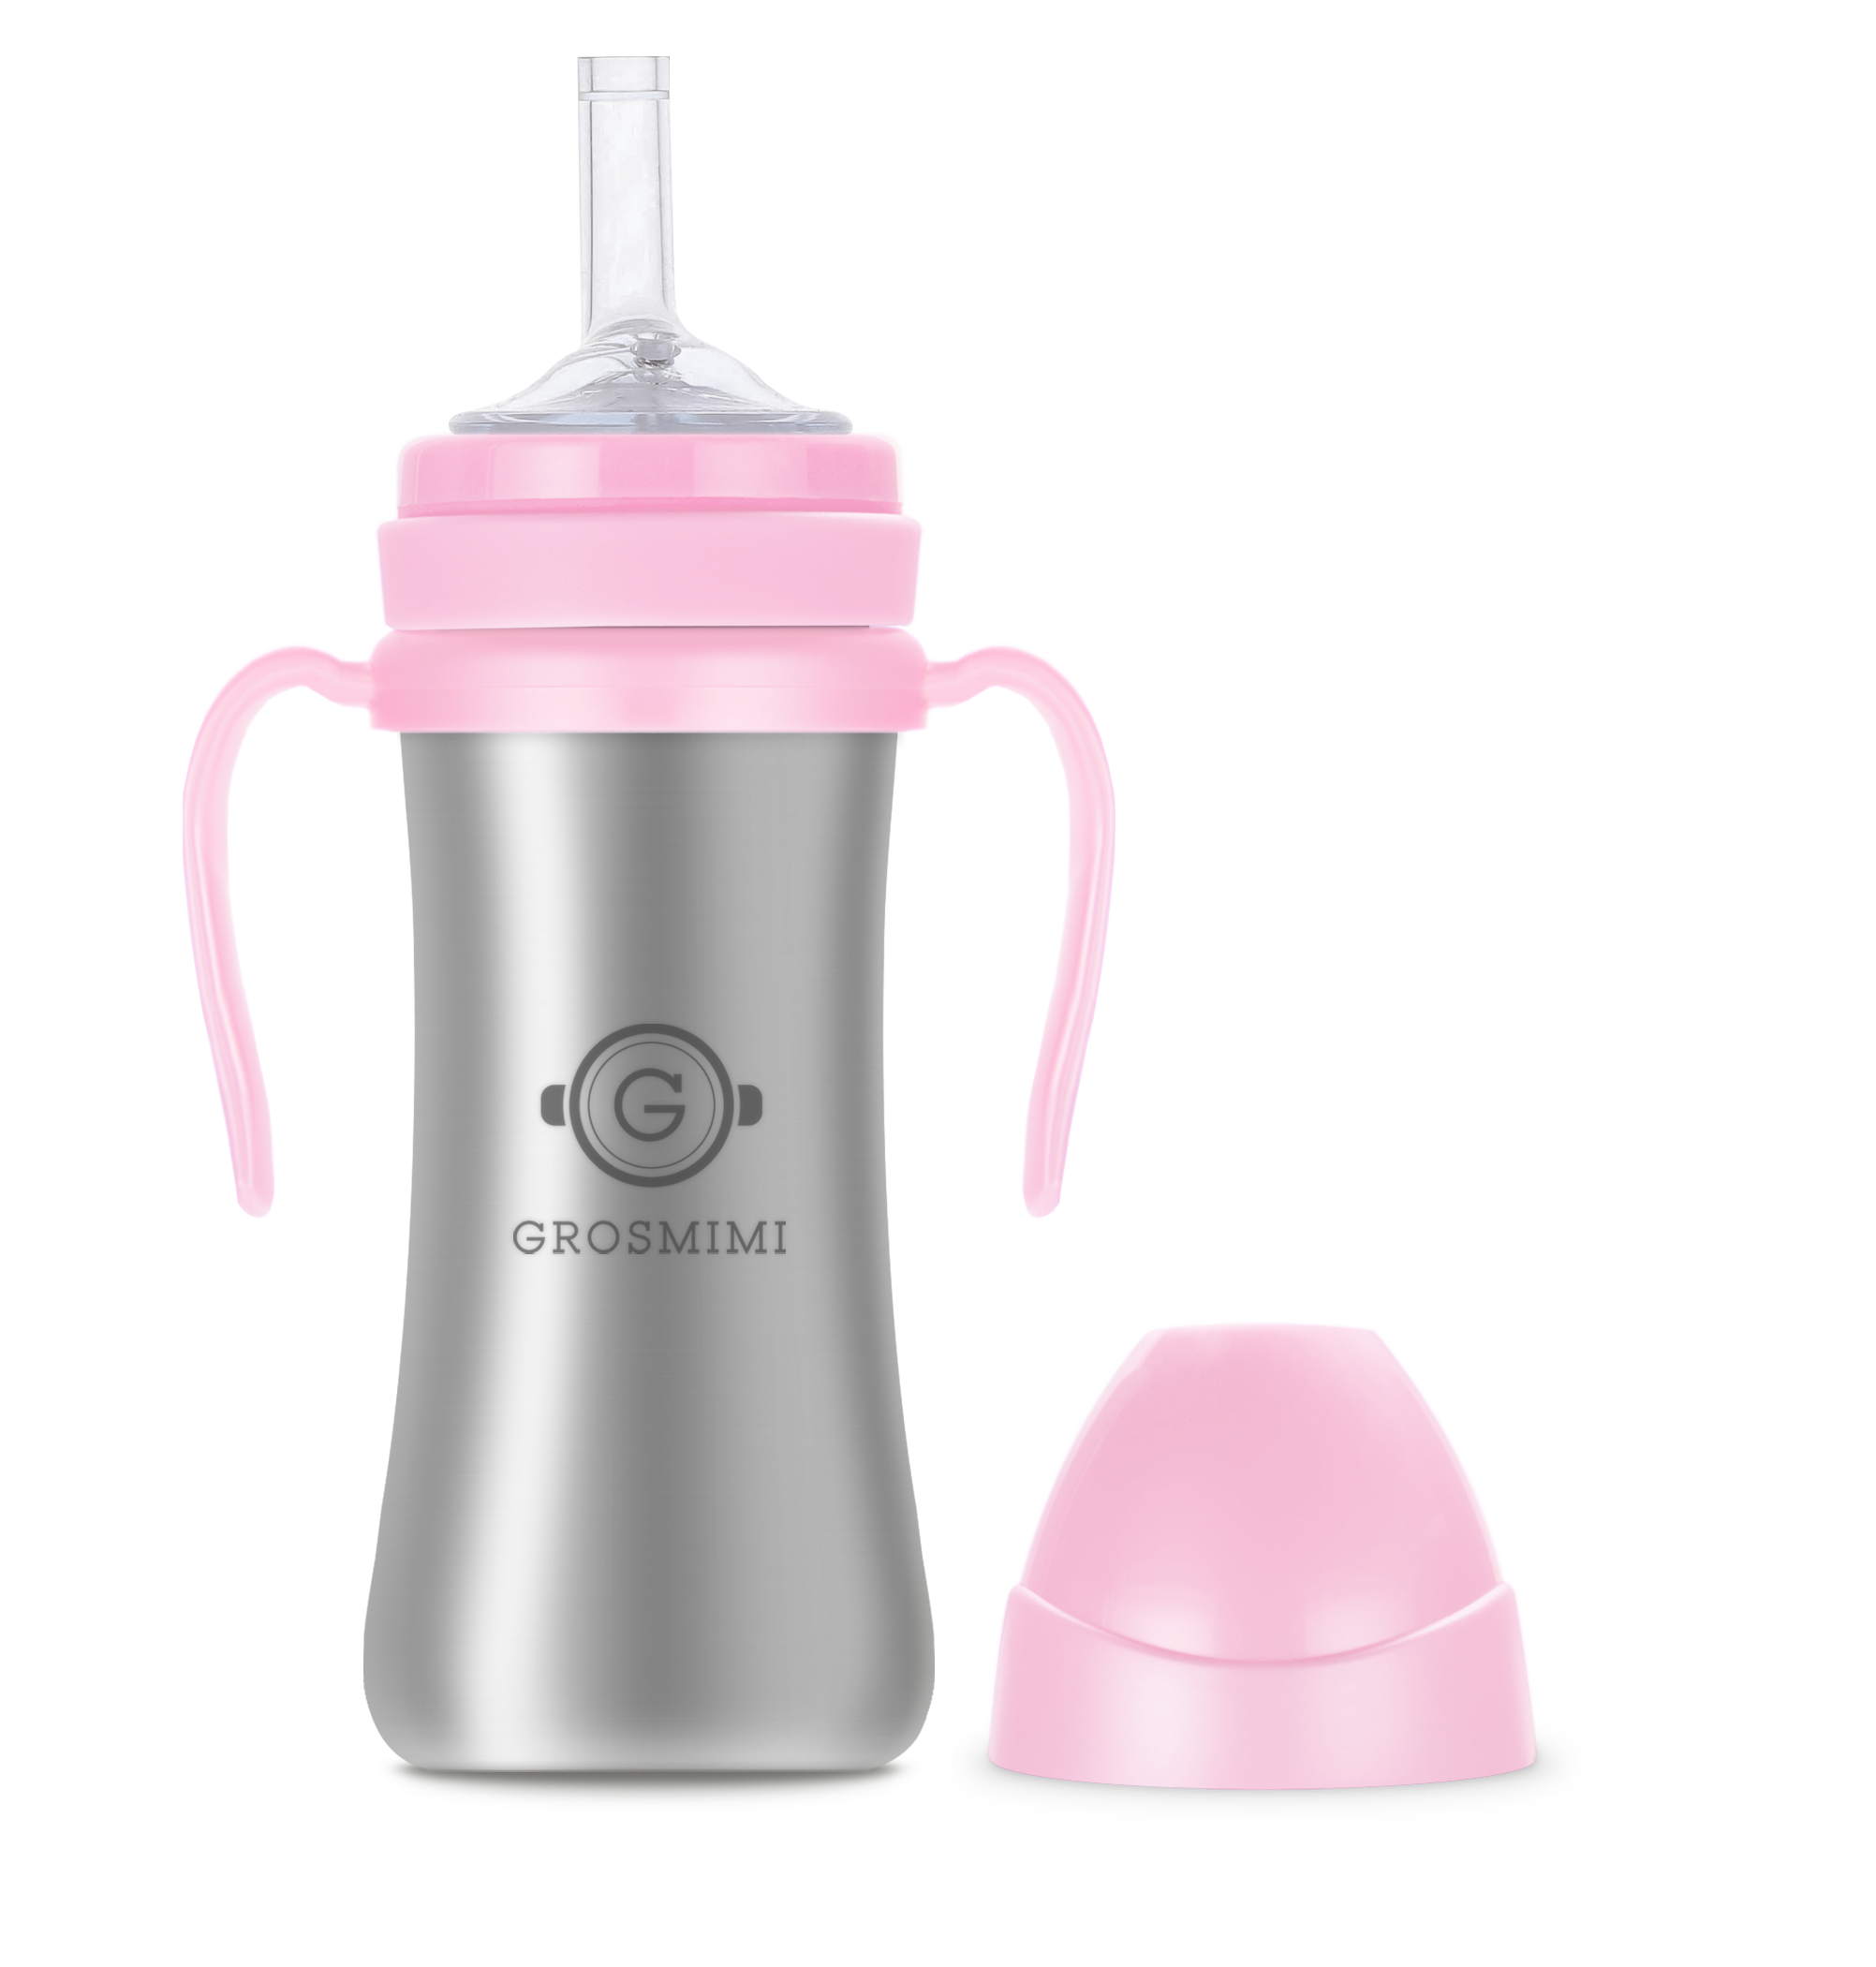 https://babybayaustralia.com.au/wp-content/uploads/2021/09/Stainless_StrawCup_200_Pink.png